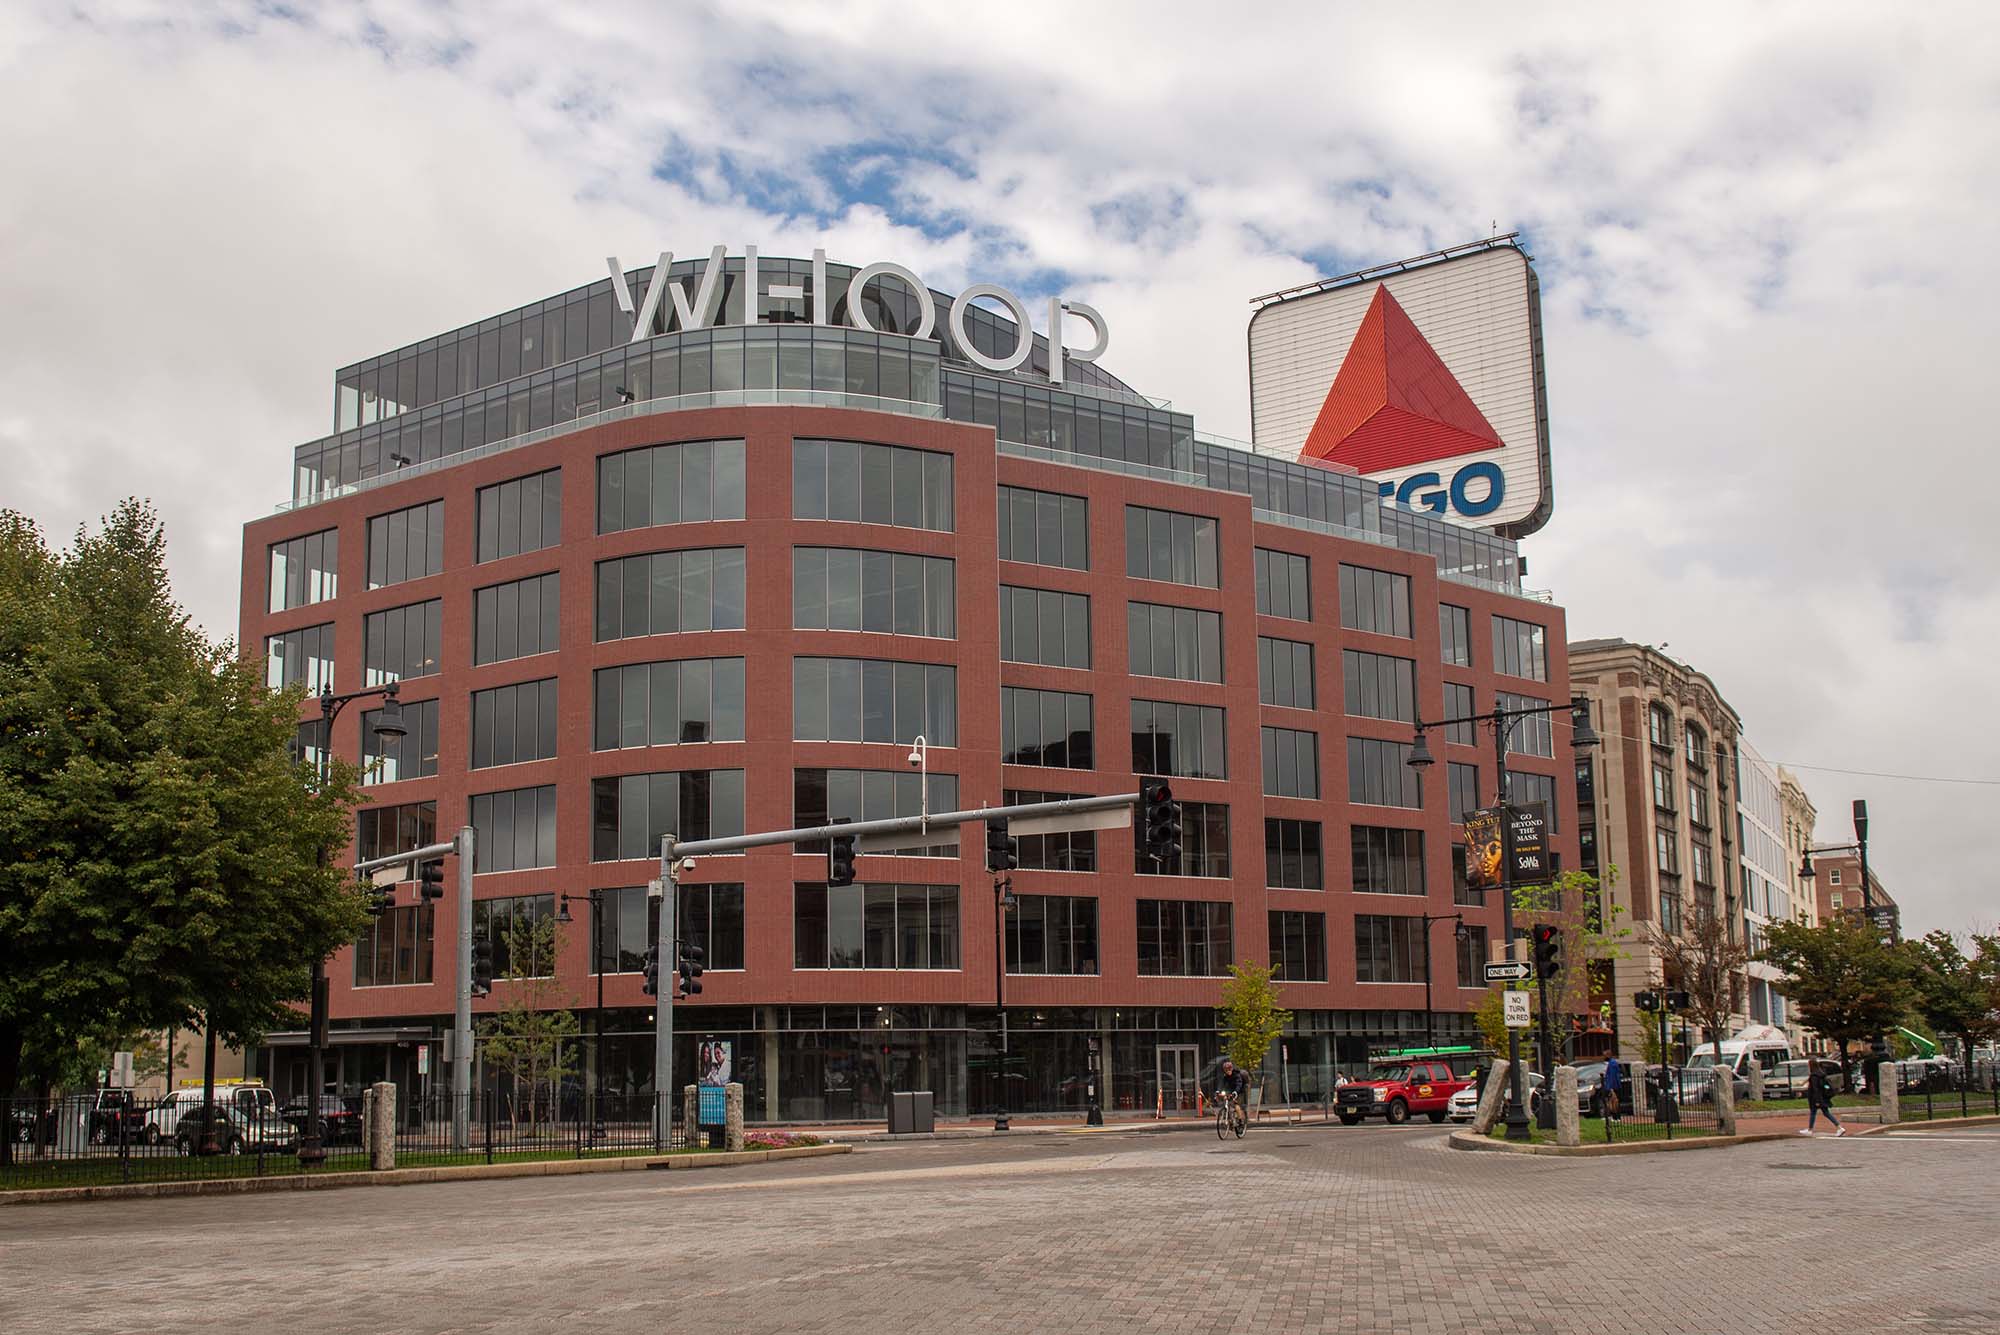 Photo of the multi-use building that is also the WHOOP headquarters in Kenmore Square. The building is brick with large blueish windows. A large grey "WHOOP" sign is prominent atop. A large CITGO sign can be seen peeking from behind the building.